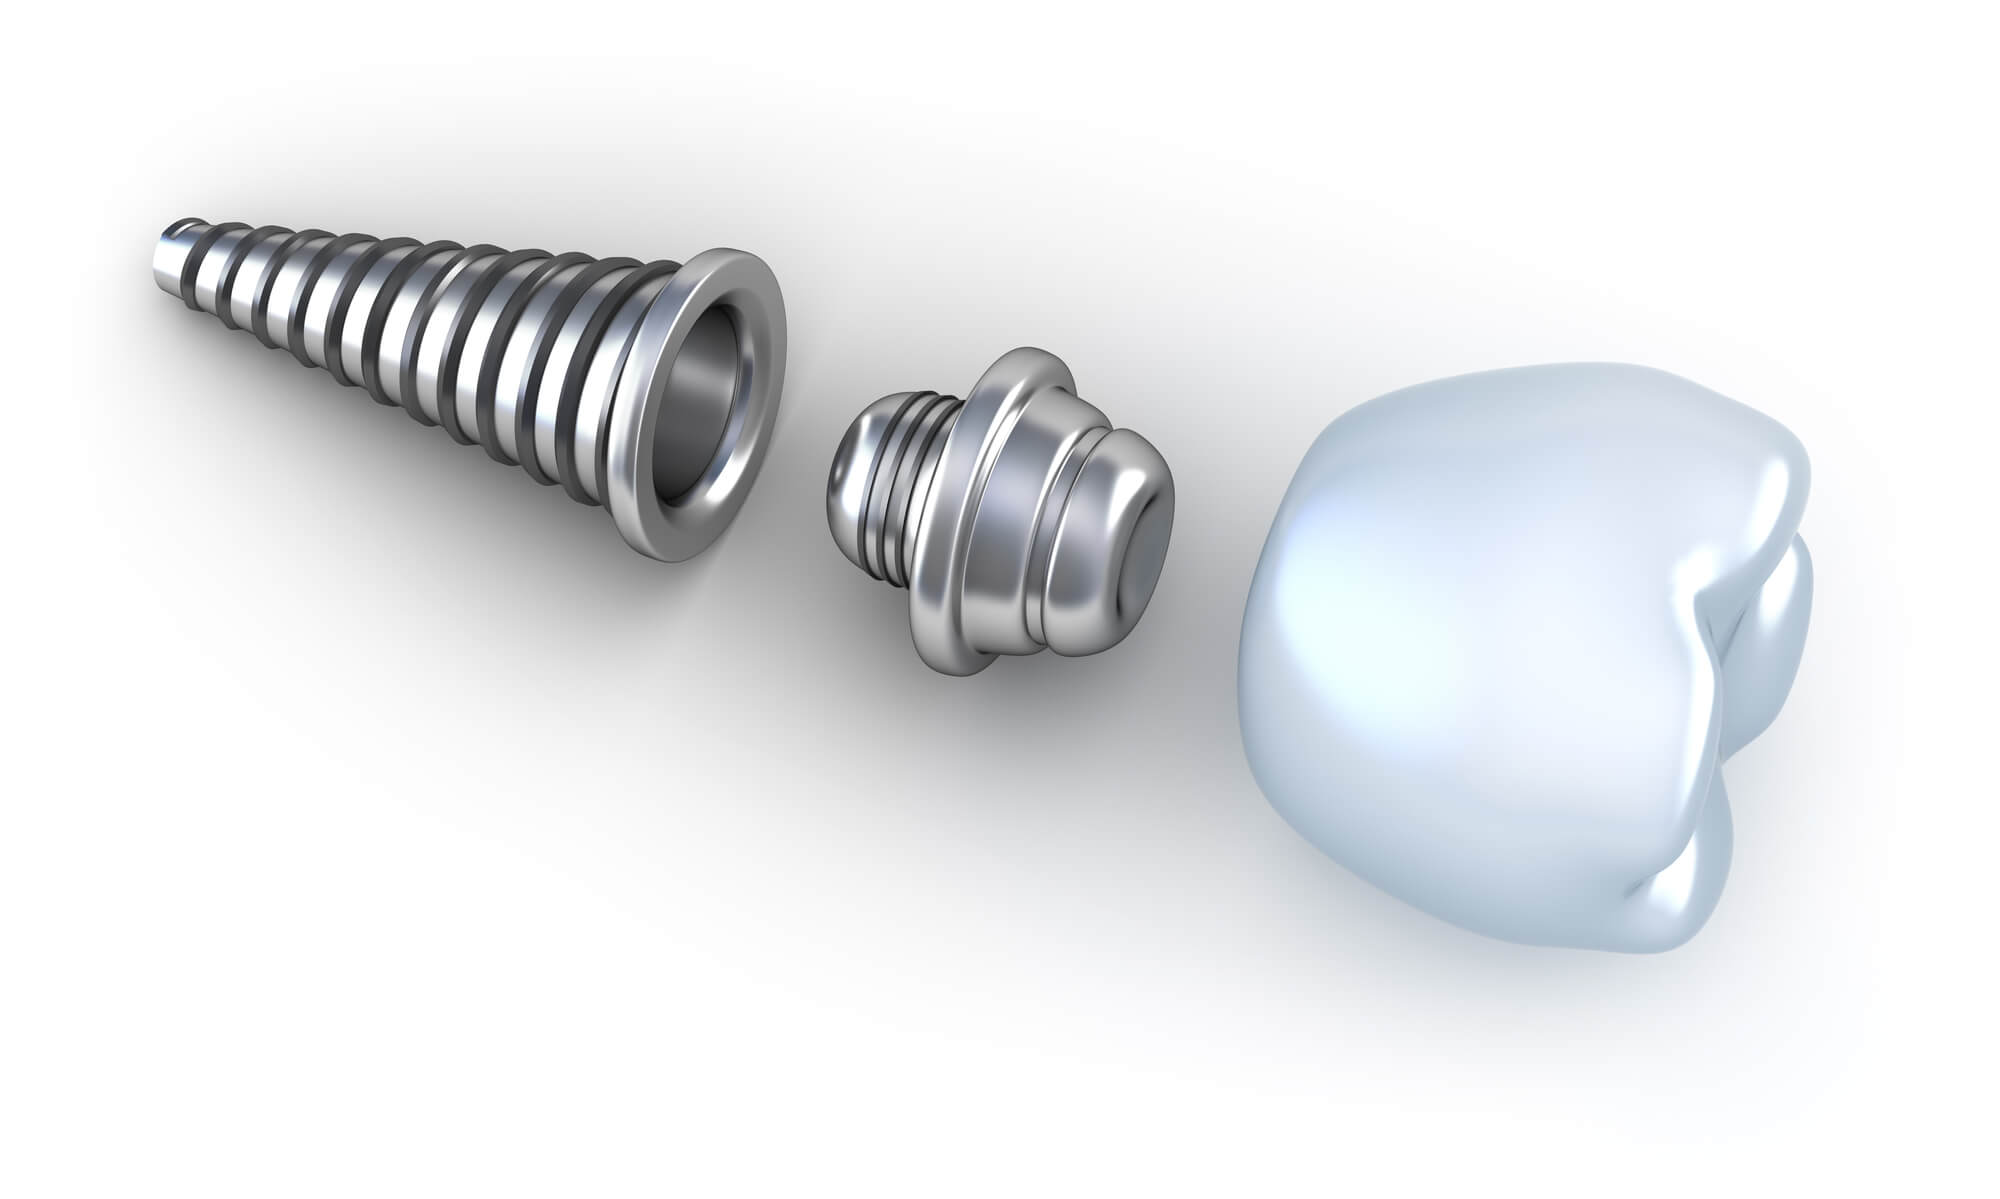 where is the best dental implants port st lucie?